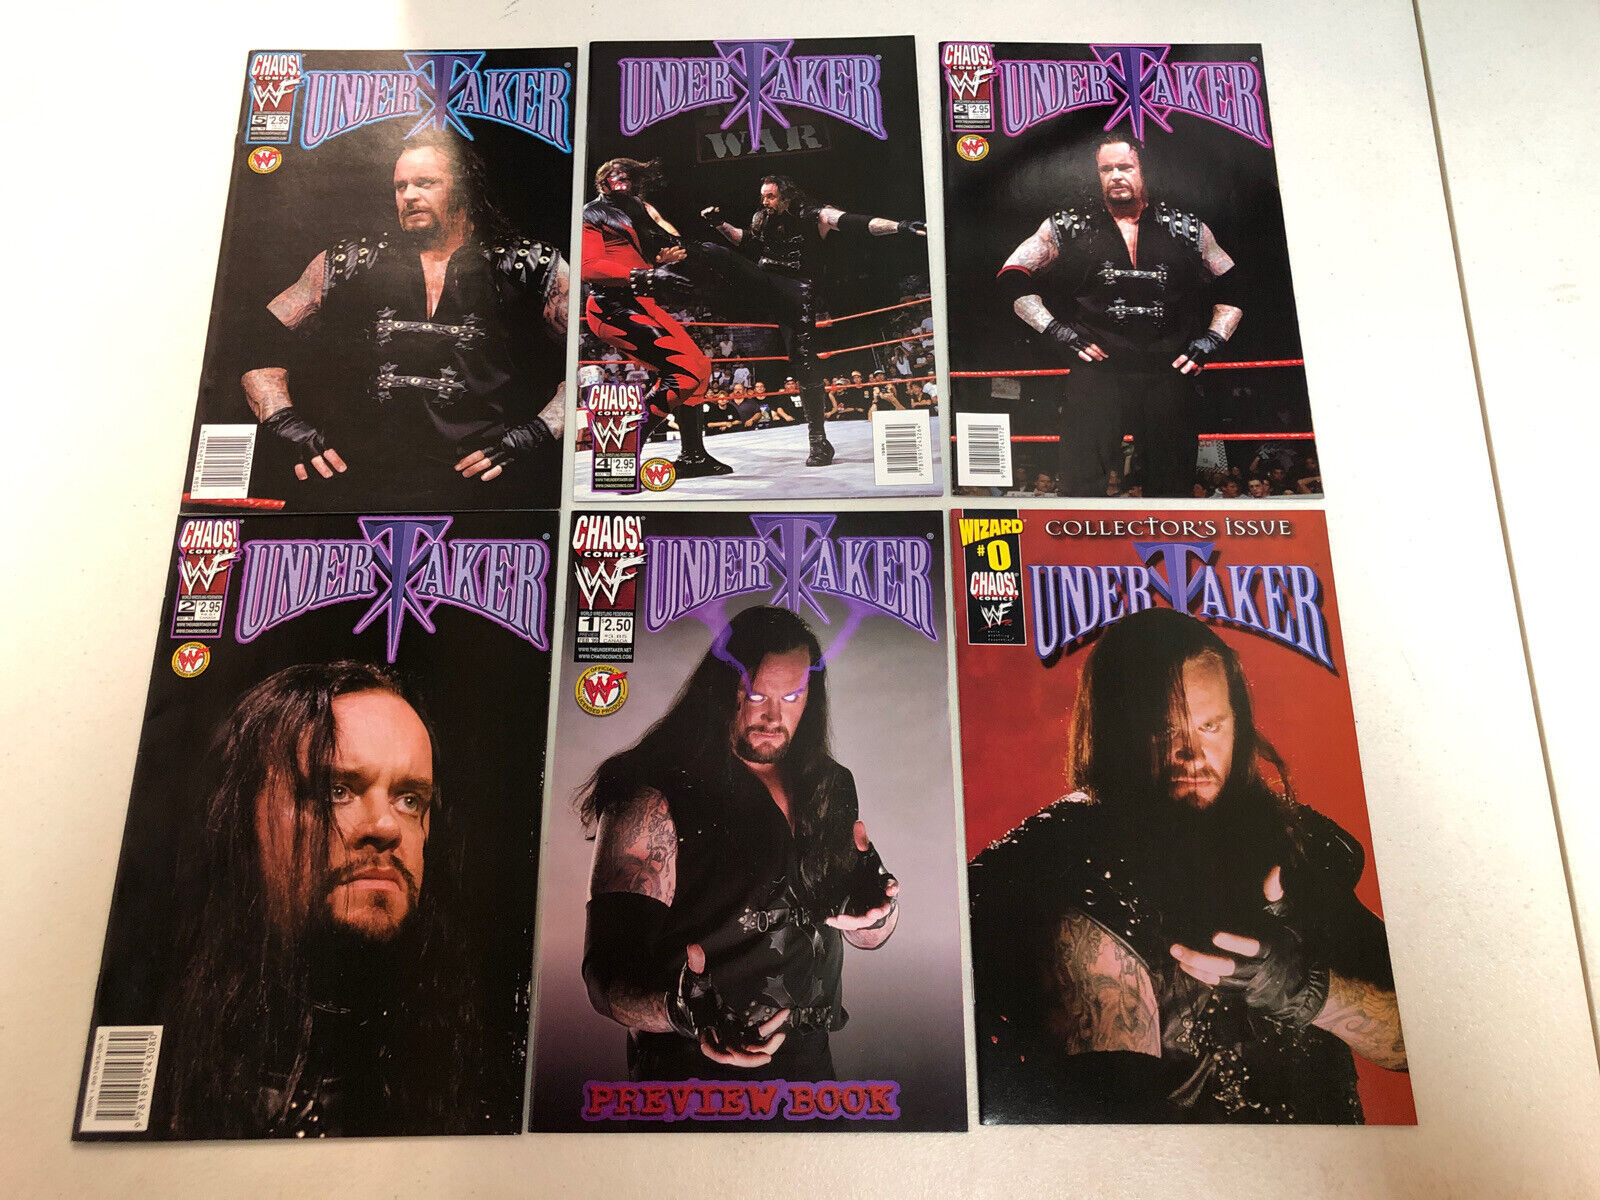 Undertaker #0 1-10 Special VF/NM Complete Set Mark William Calaway photo covers